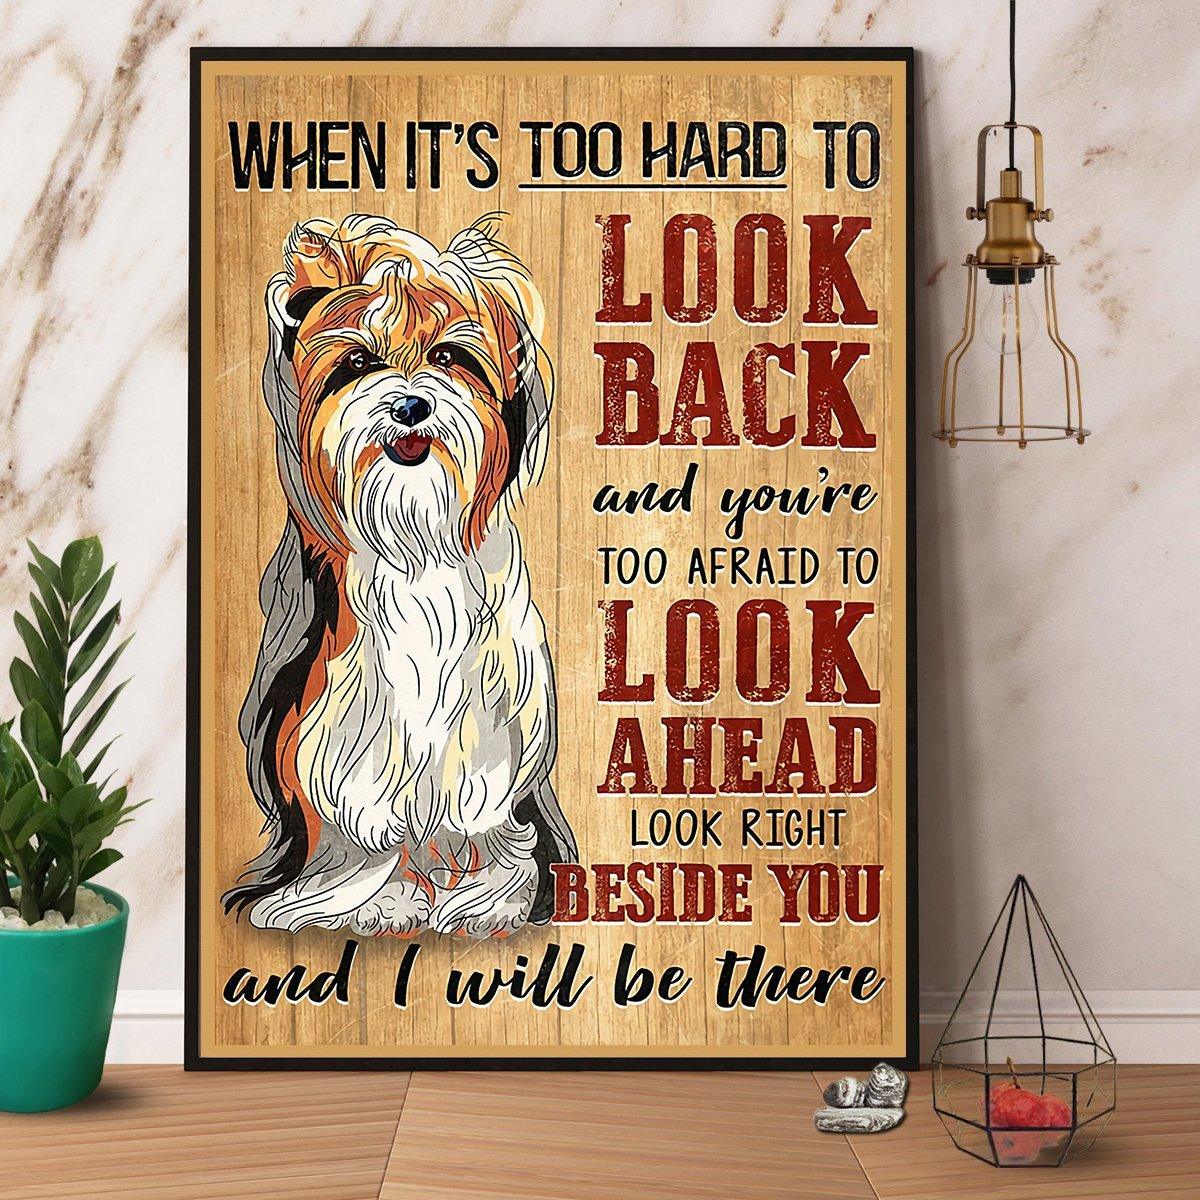 Yorkshire Terrier Portrait Premium Wrapped Canvas - When It's Too Hard To Look Back Canvas - Gift For Family, Friend, Yorkshire Terrier Lovers - Amzanimalsgift